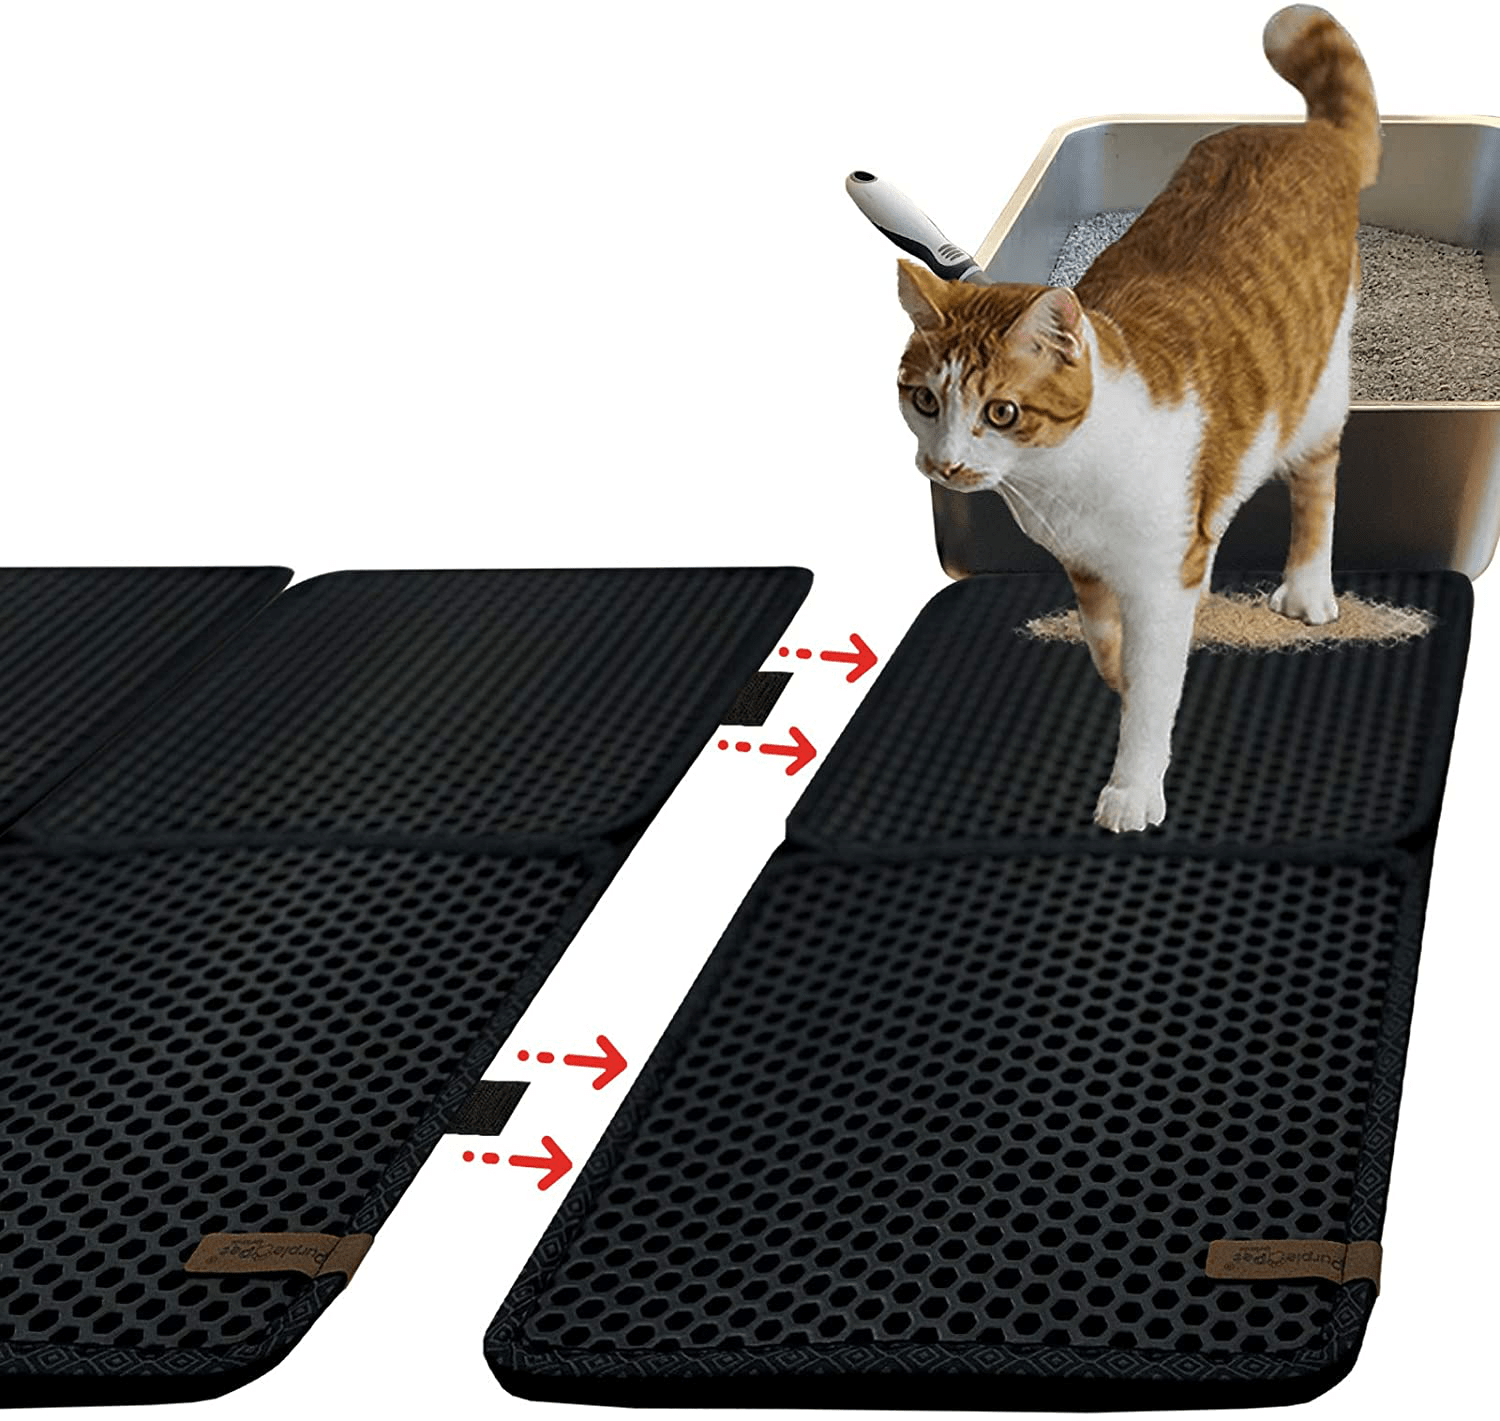 2 Pack Foldable Cat Litter Trapper (27 by 27) Mat Connects with